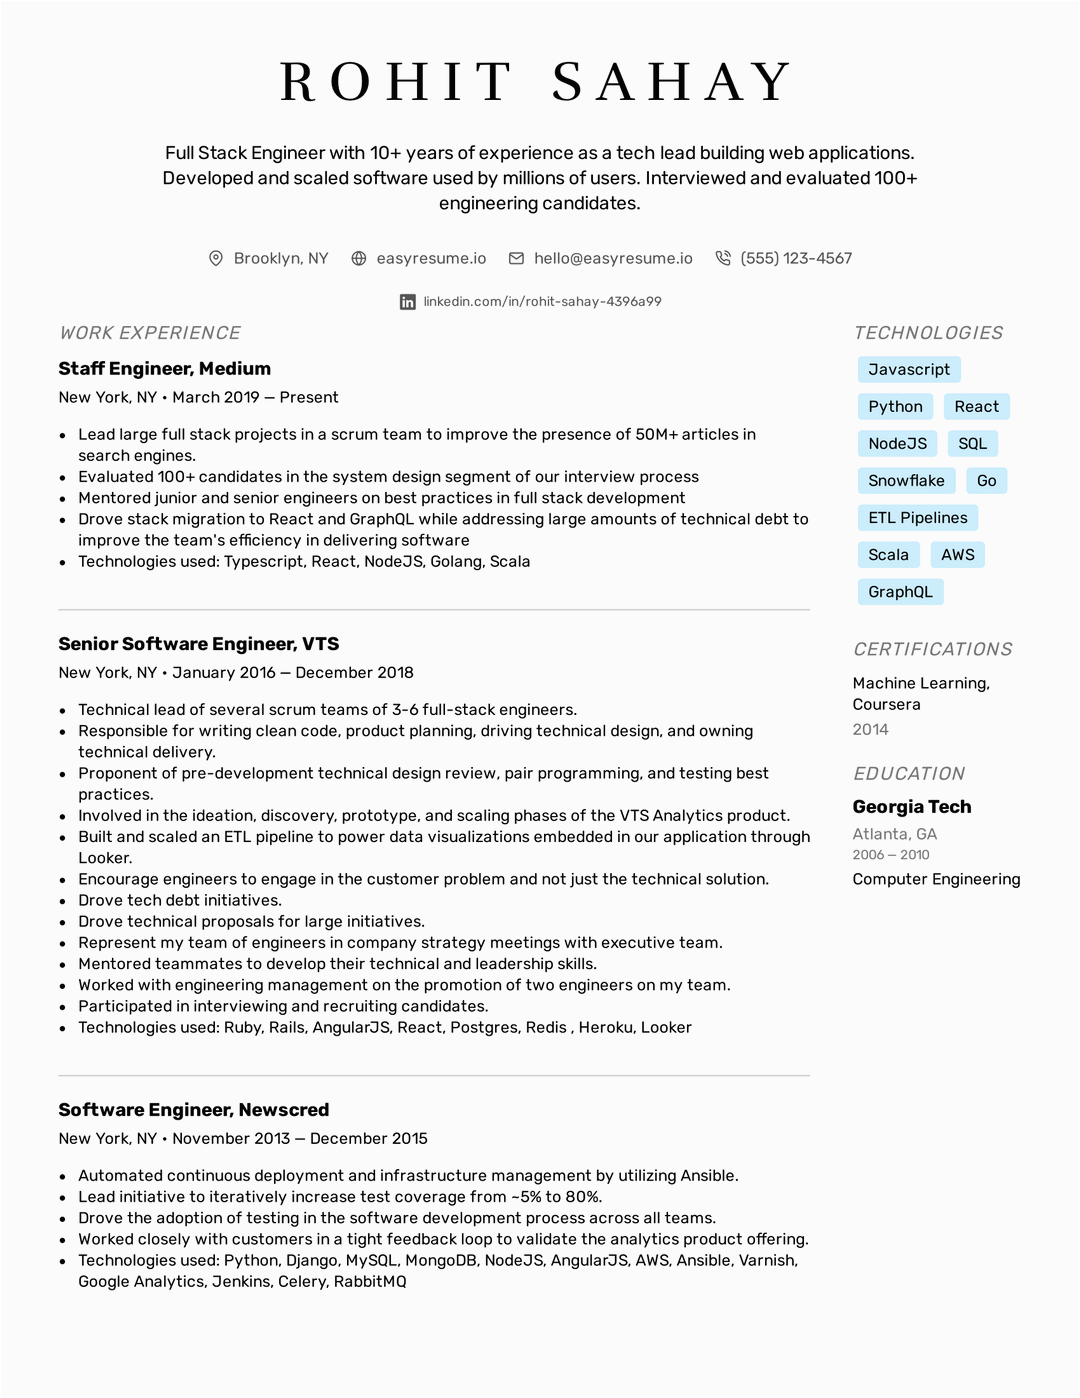 Sample Of Common Technology Skills On Resume 15 It Skills to List On Your Resume In 2022 with Examples